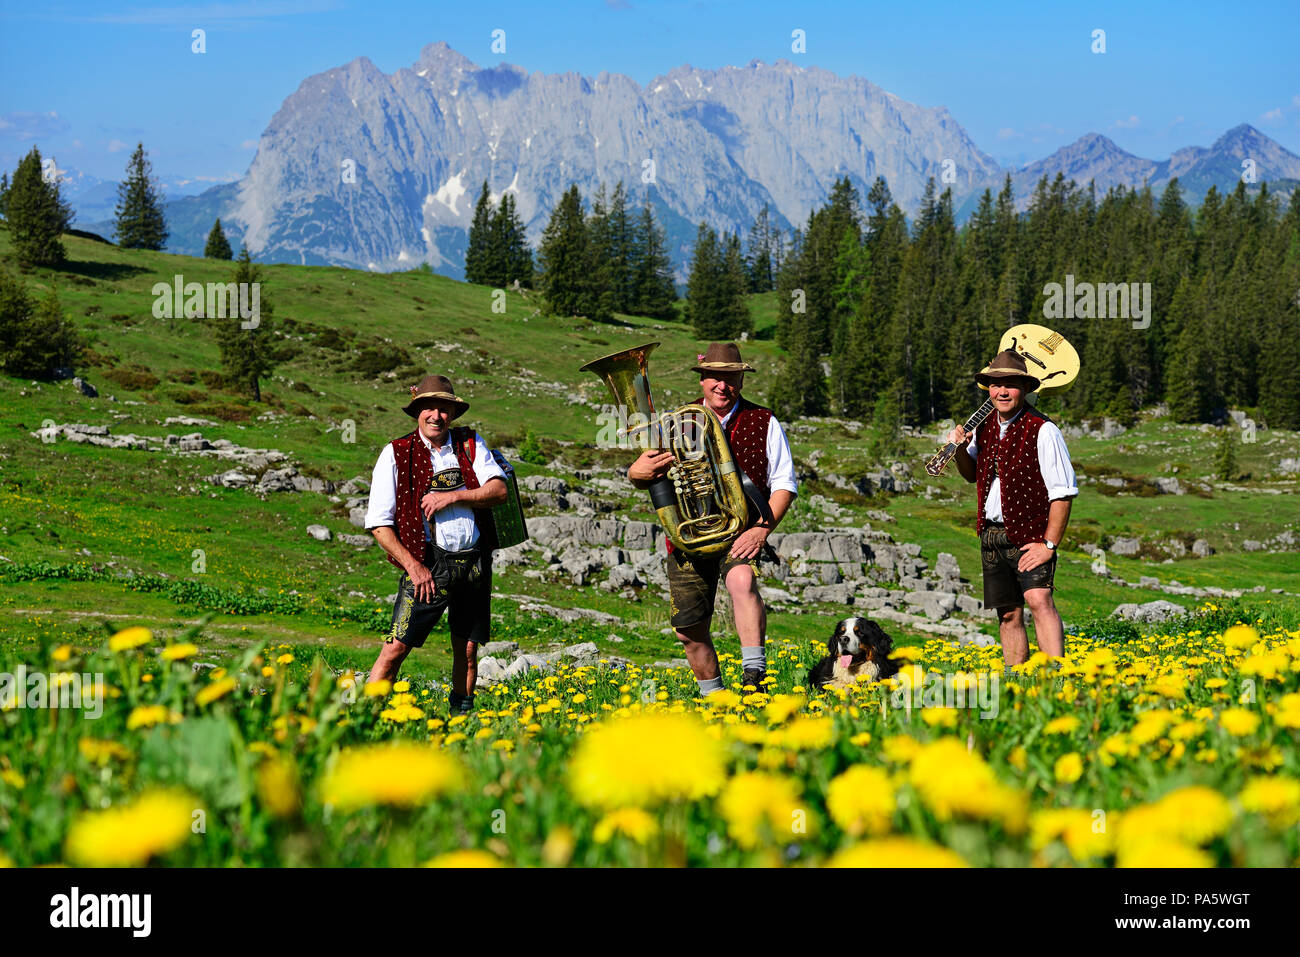 Three folk musicians with instruments, Bergfexn trio in traditional costume on the Eggenalm, behind Wilder Kaiser, Reit im Winkl Stock Photo